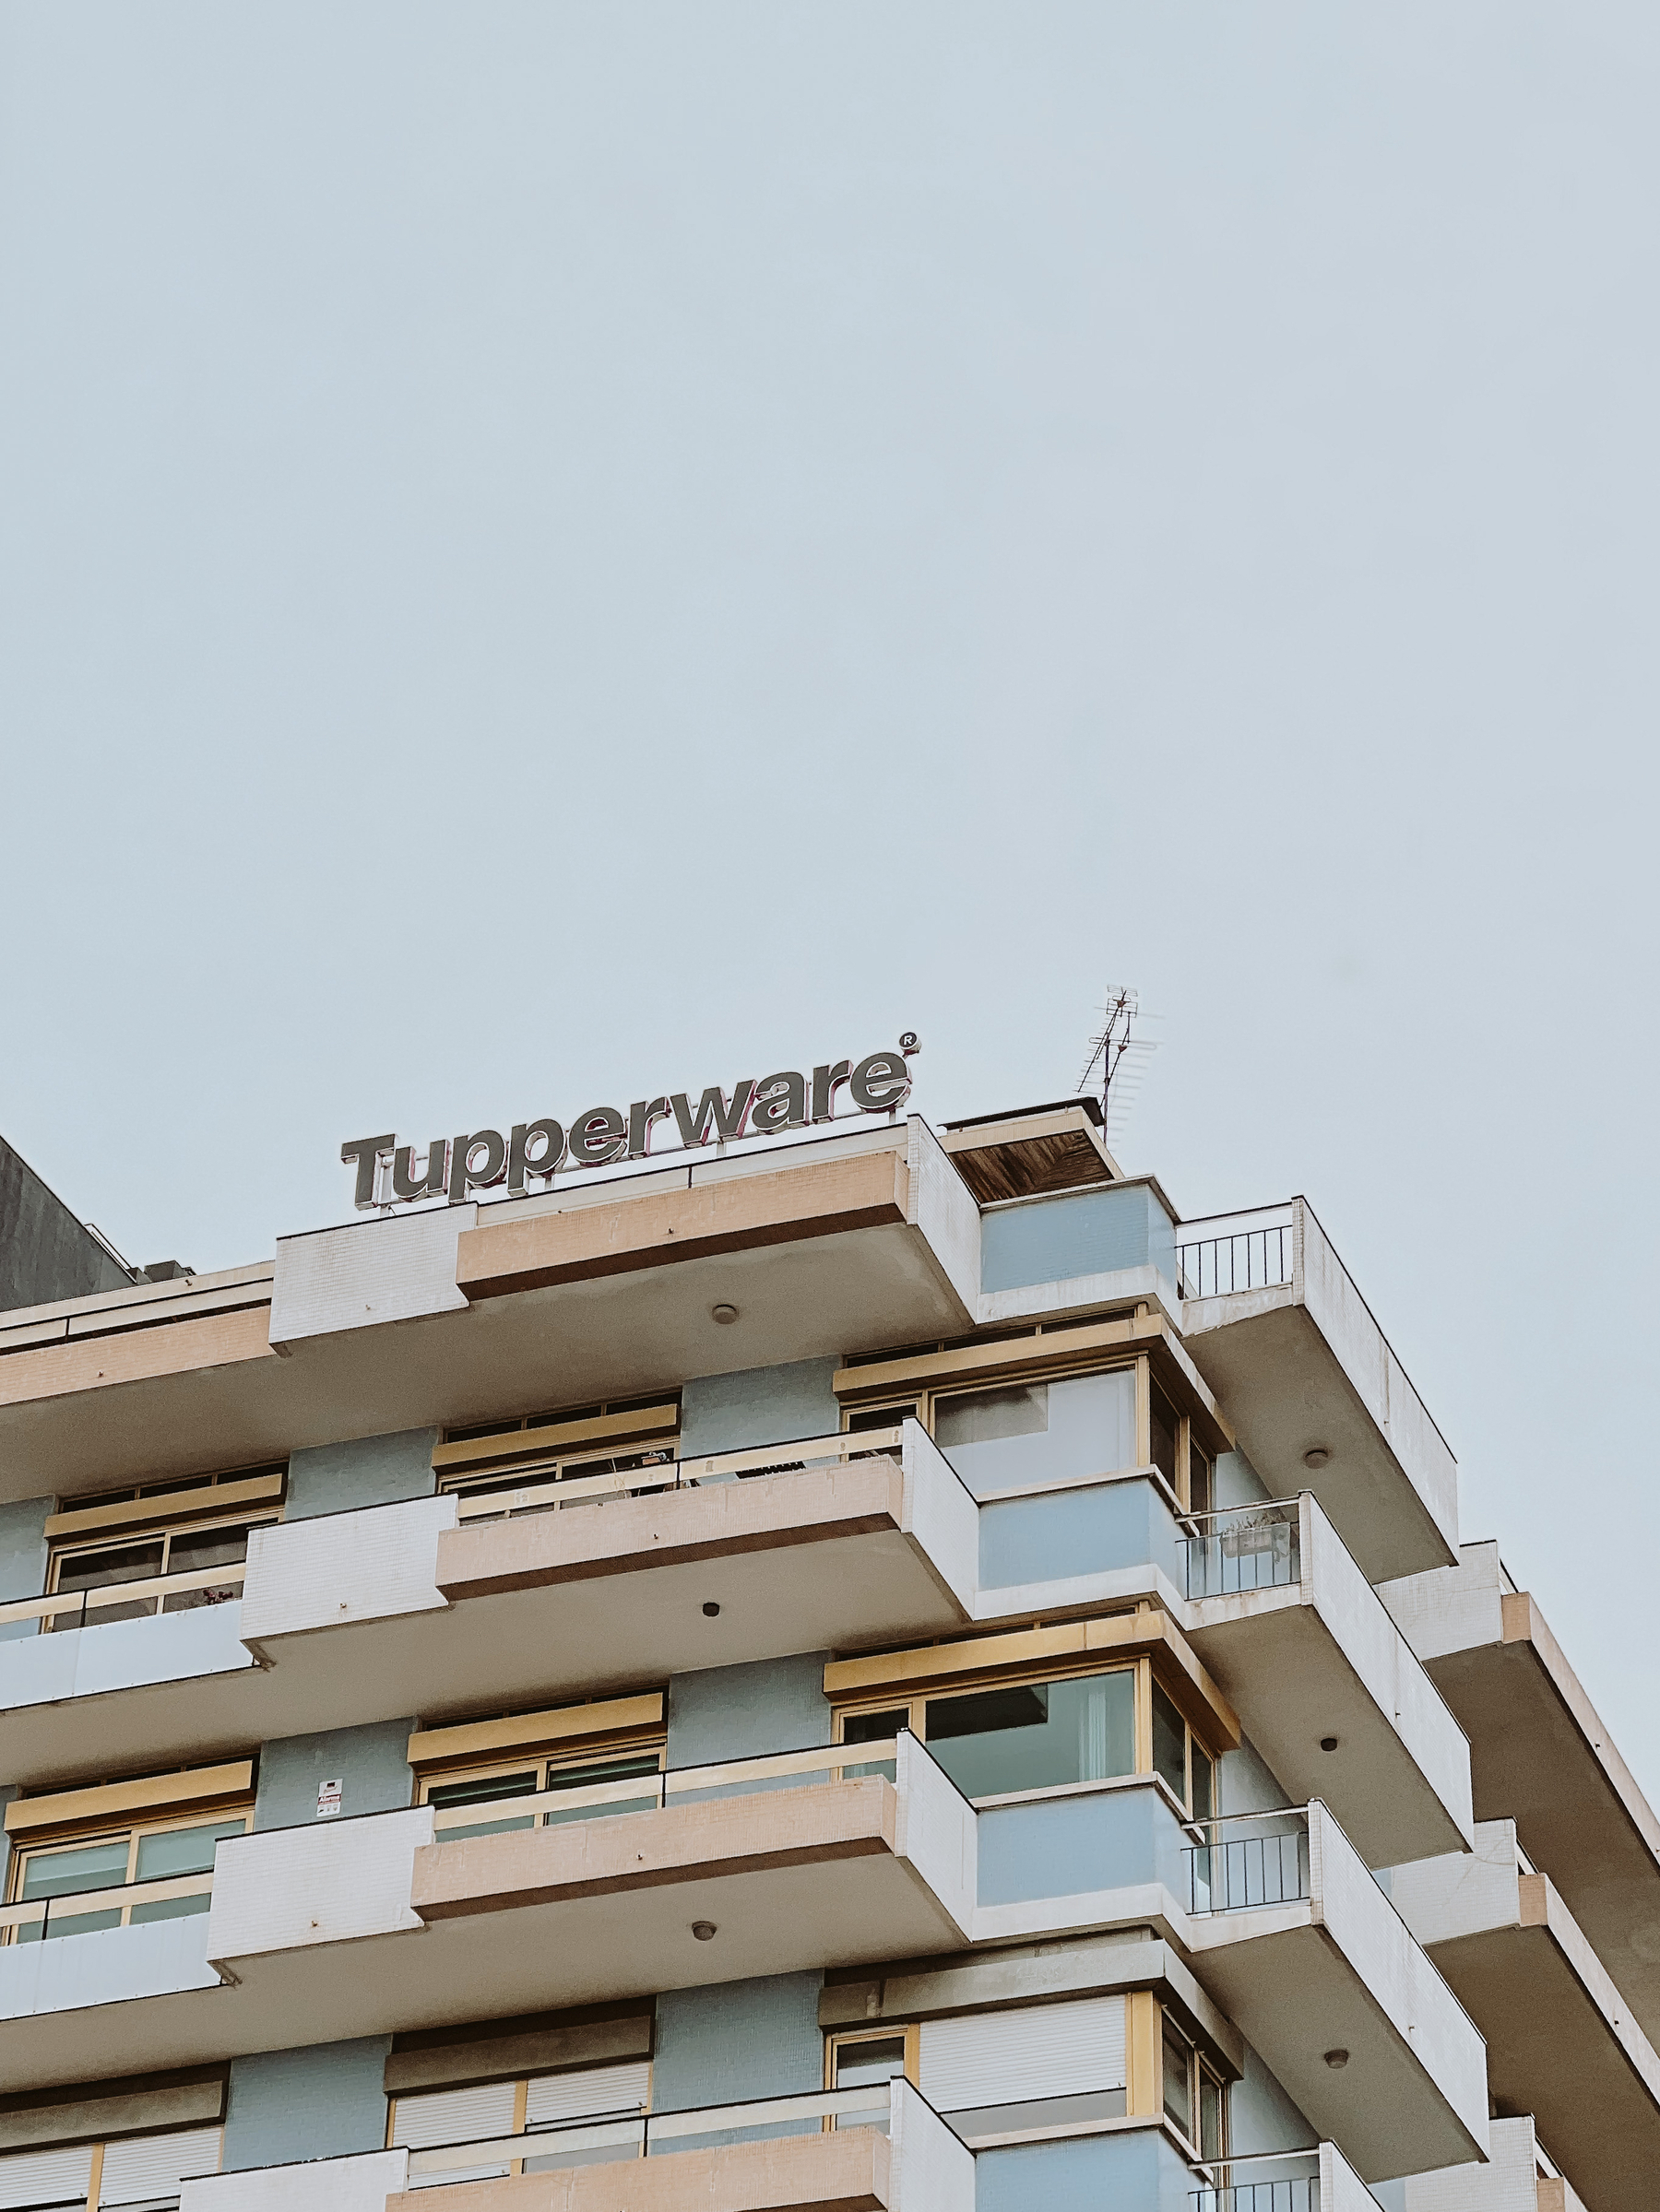 A Tupperware sign on the roof of a building.